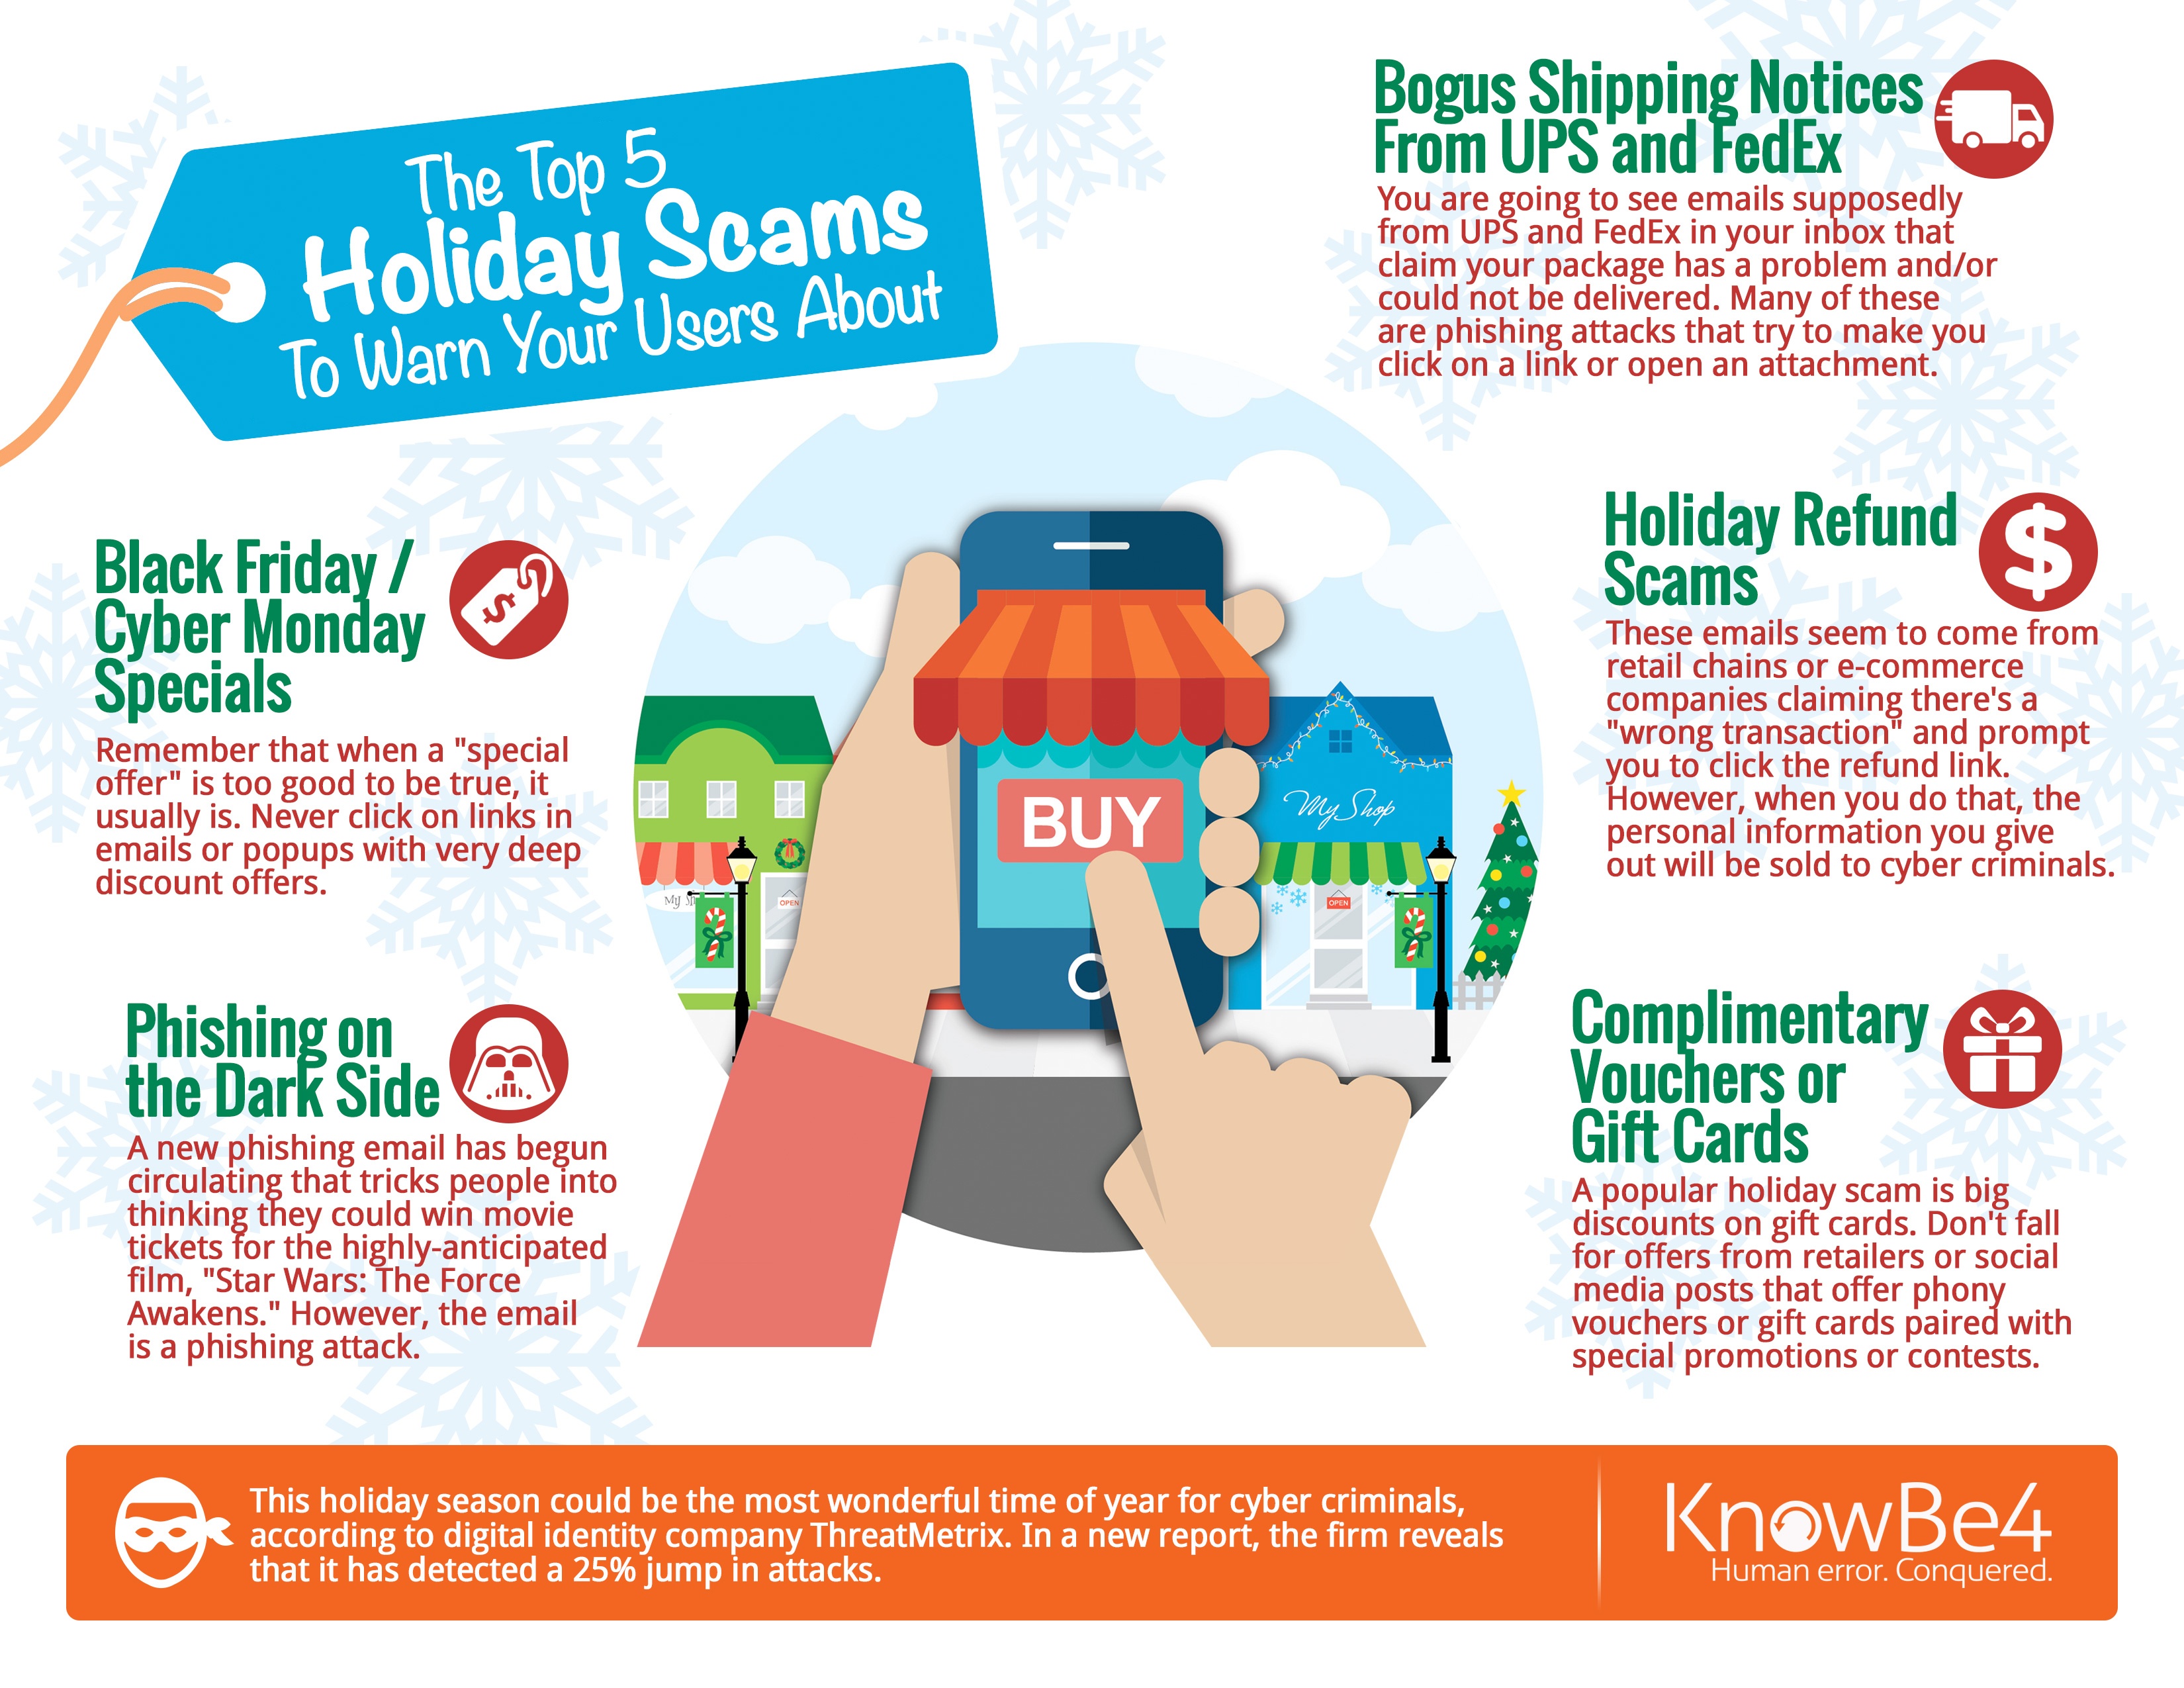 [INFOGRAPHIC] The Top 5 Holiday Scams To Warn Your Users About